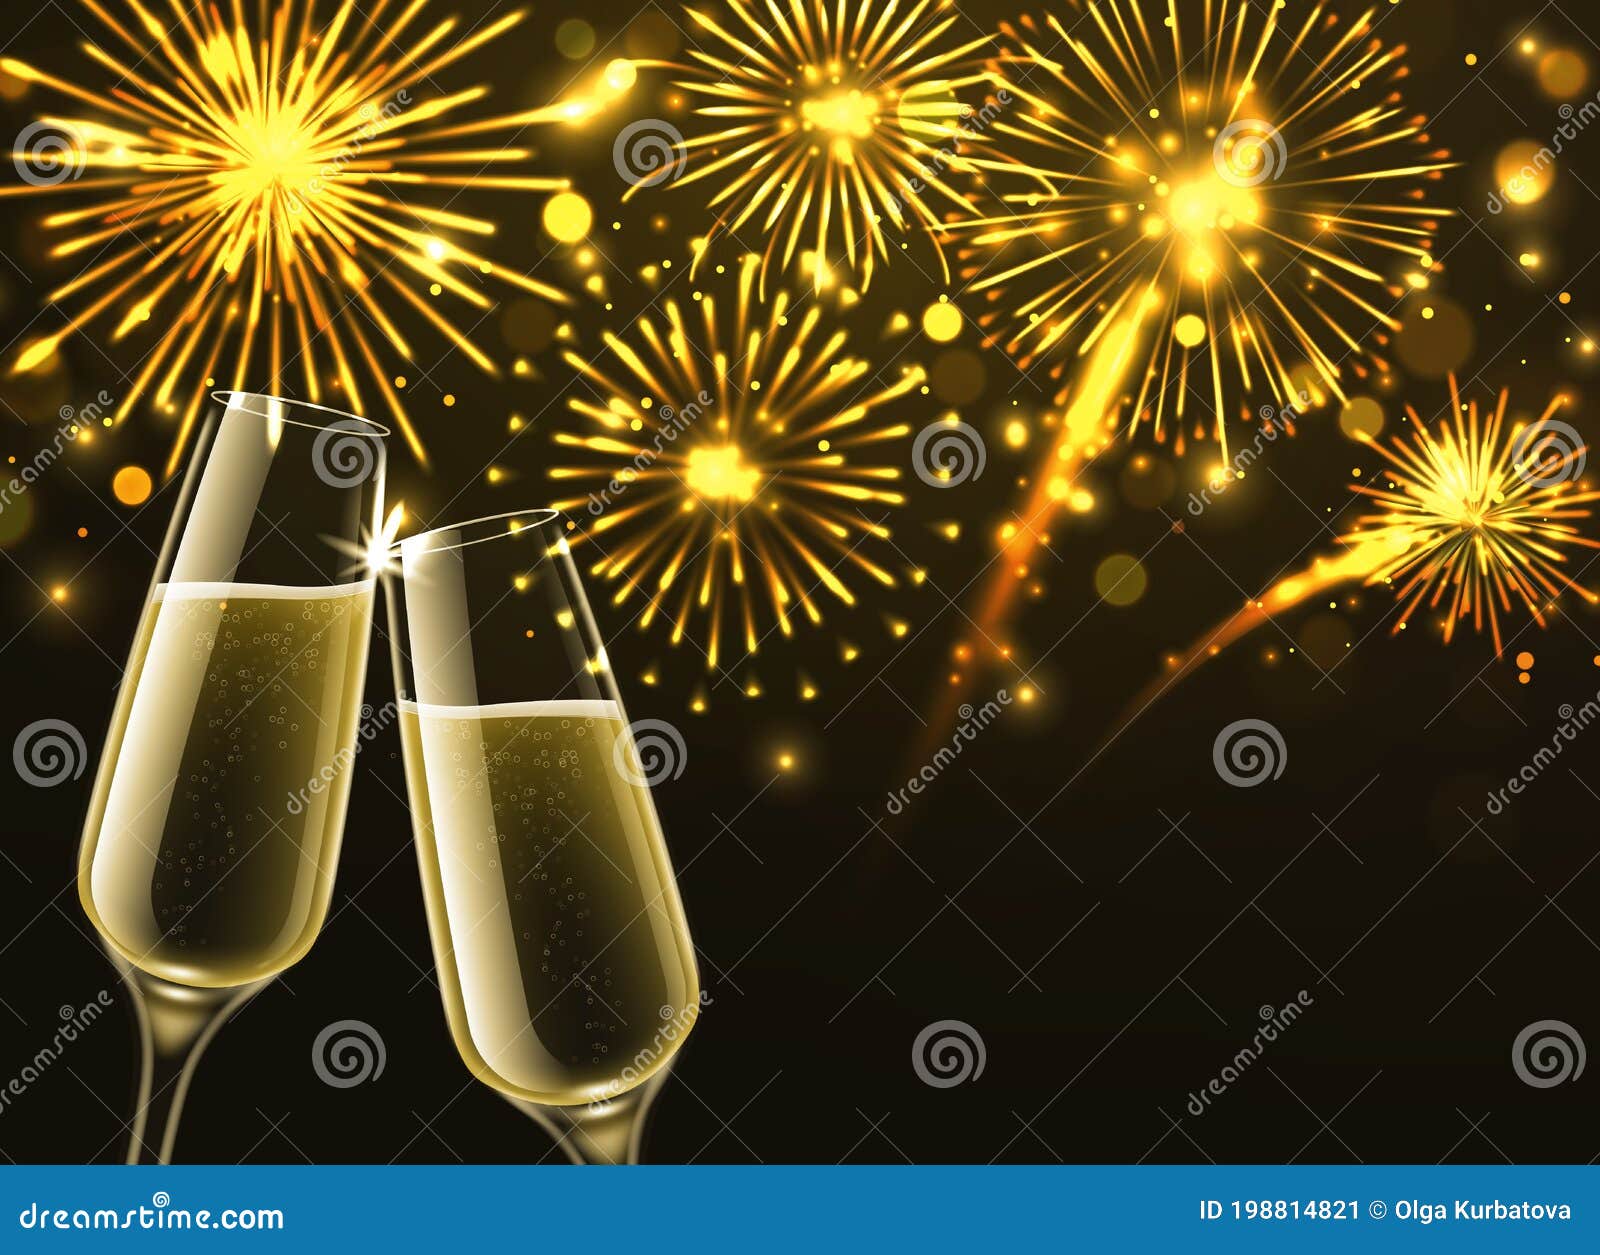 fireworks and champagne glasses. sparkling wine and new year golden firework with bokeh effect, congratulatory toast